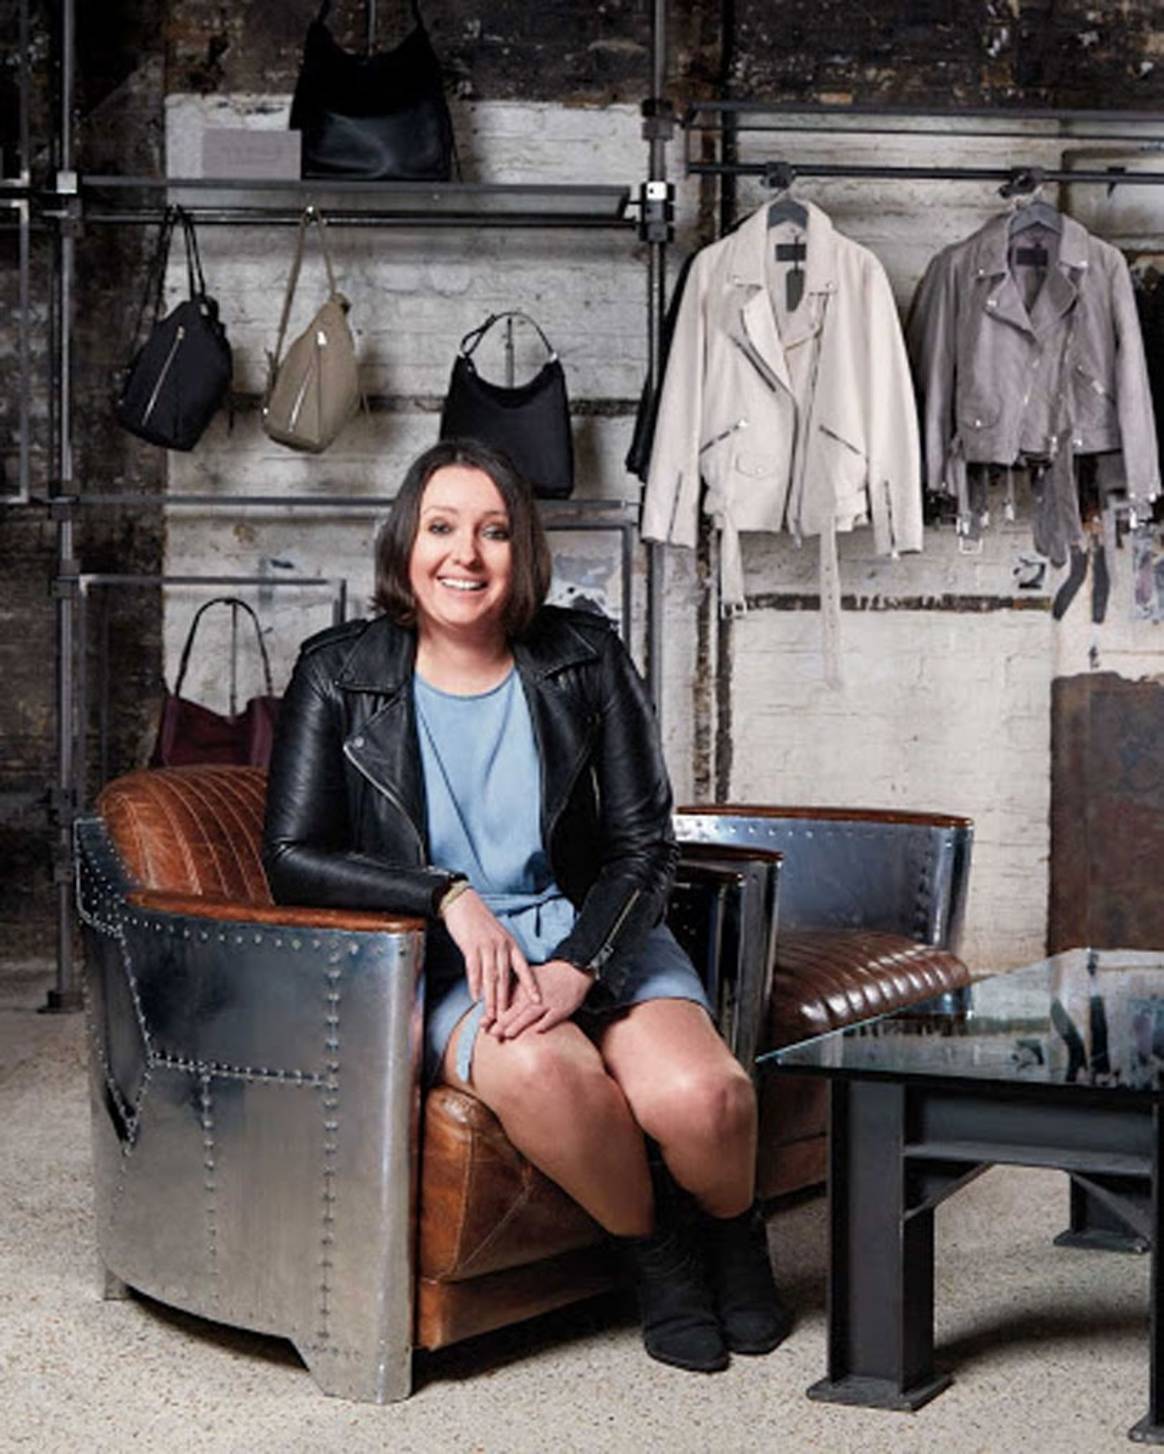 Interview: Vanessa Hollis, Store Manager at AllSaints